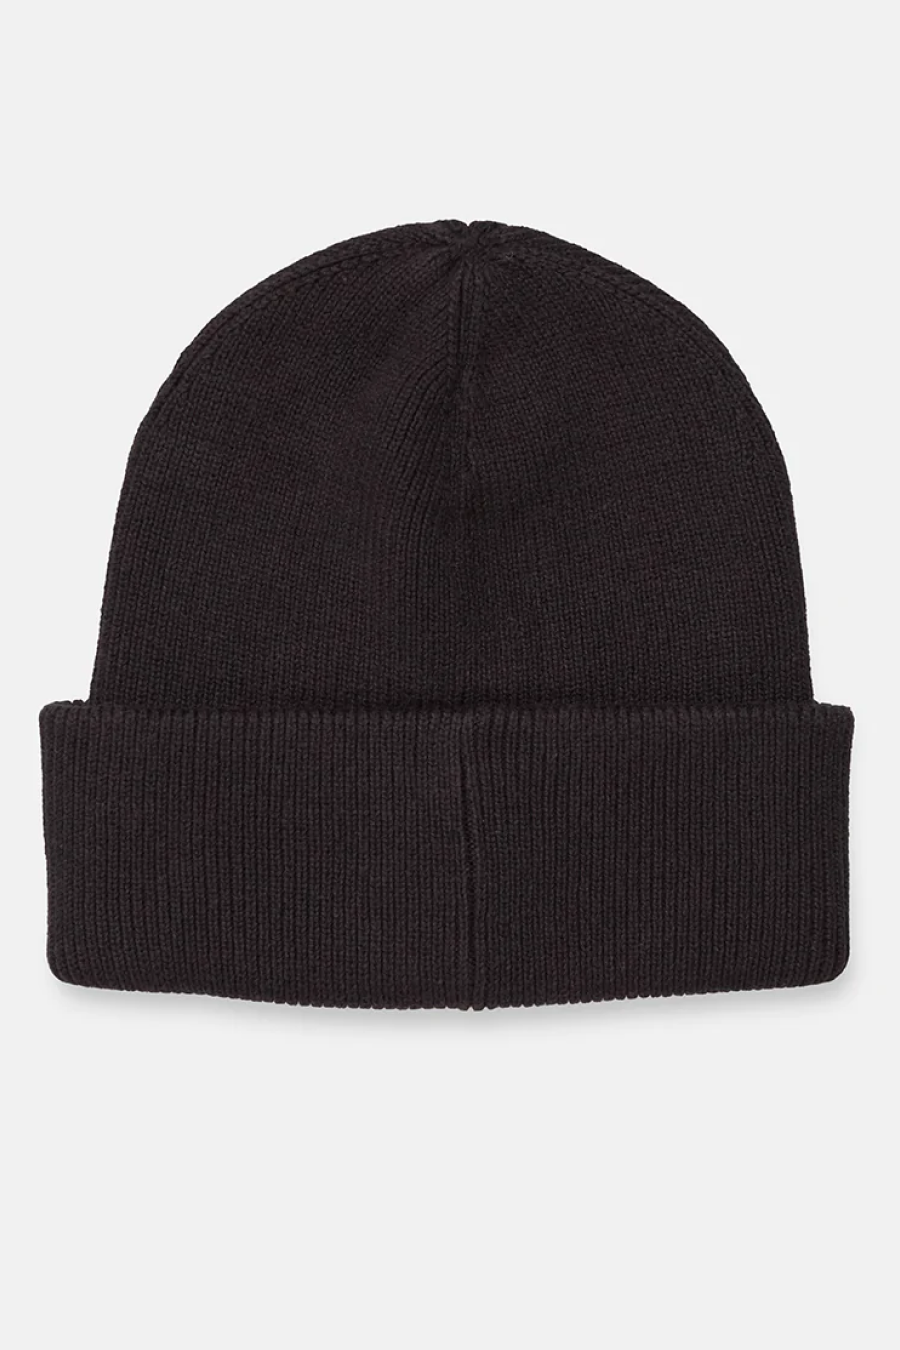 Tentree Cotton Patch Beanie